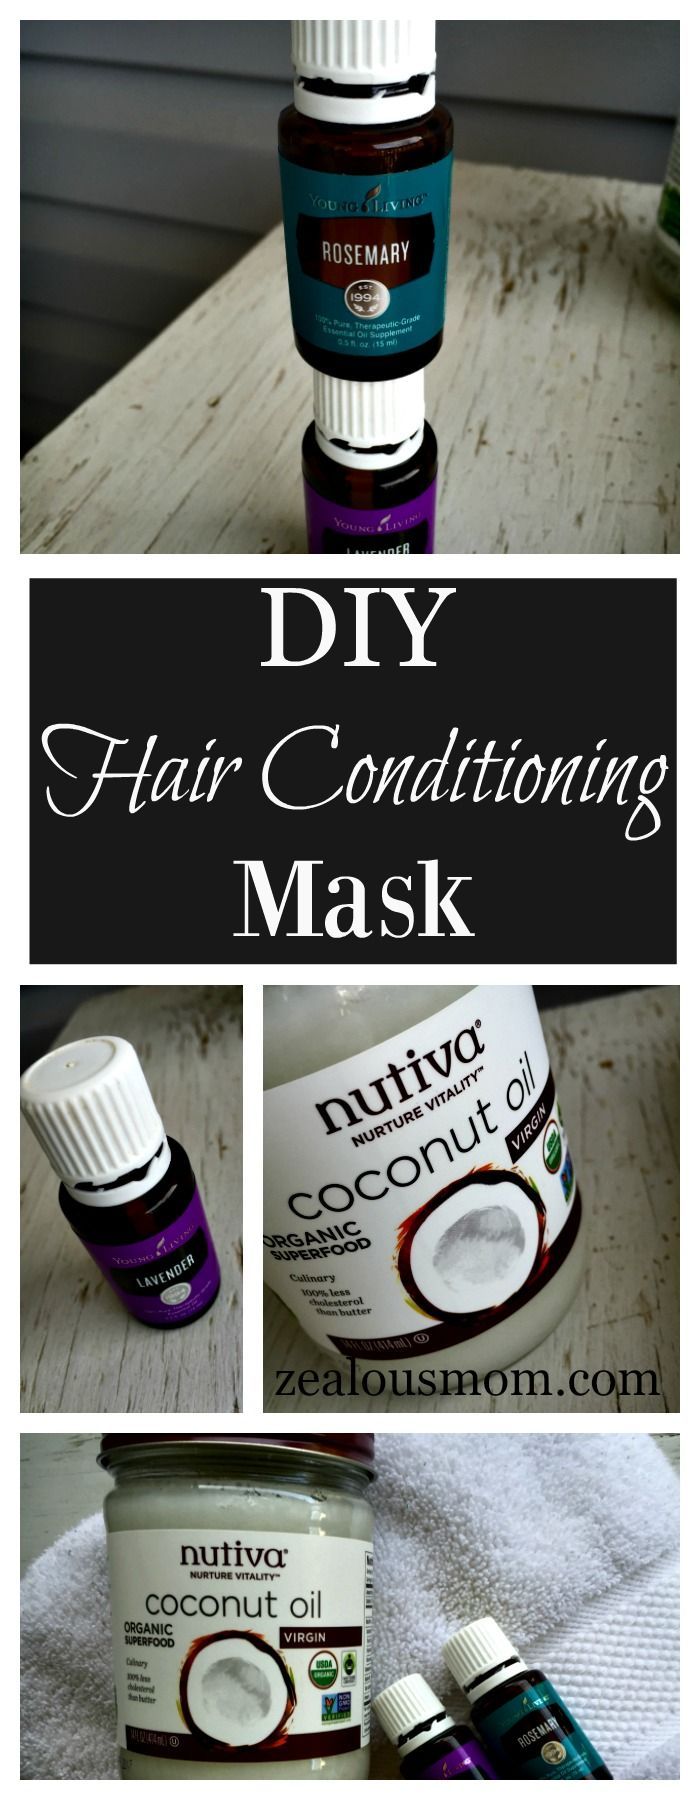 DIY Hair Conditioning Mask -   24 fitness coconut oil
 ideas